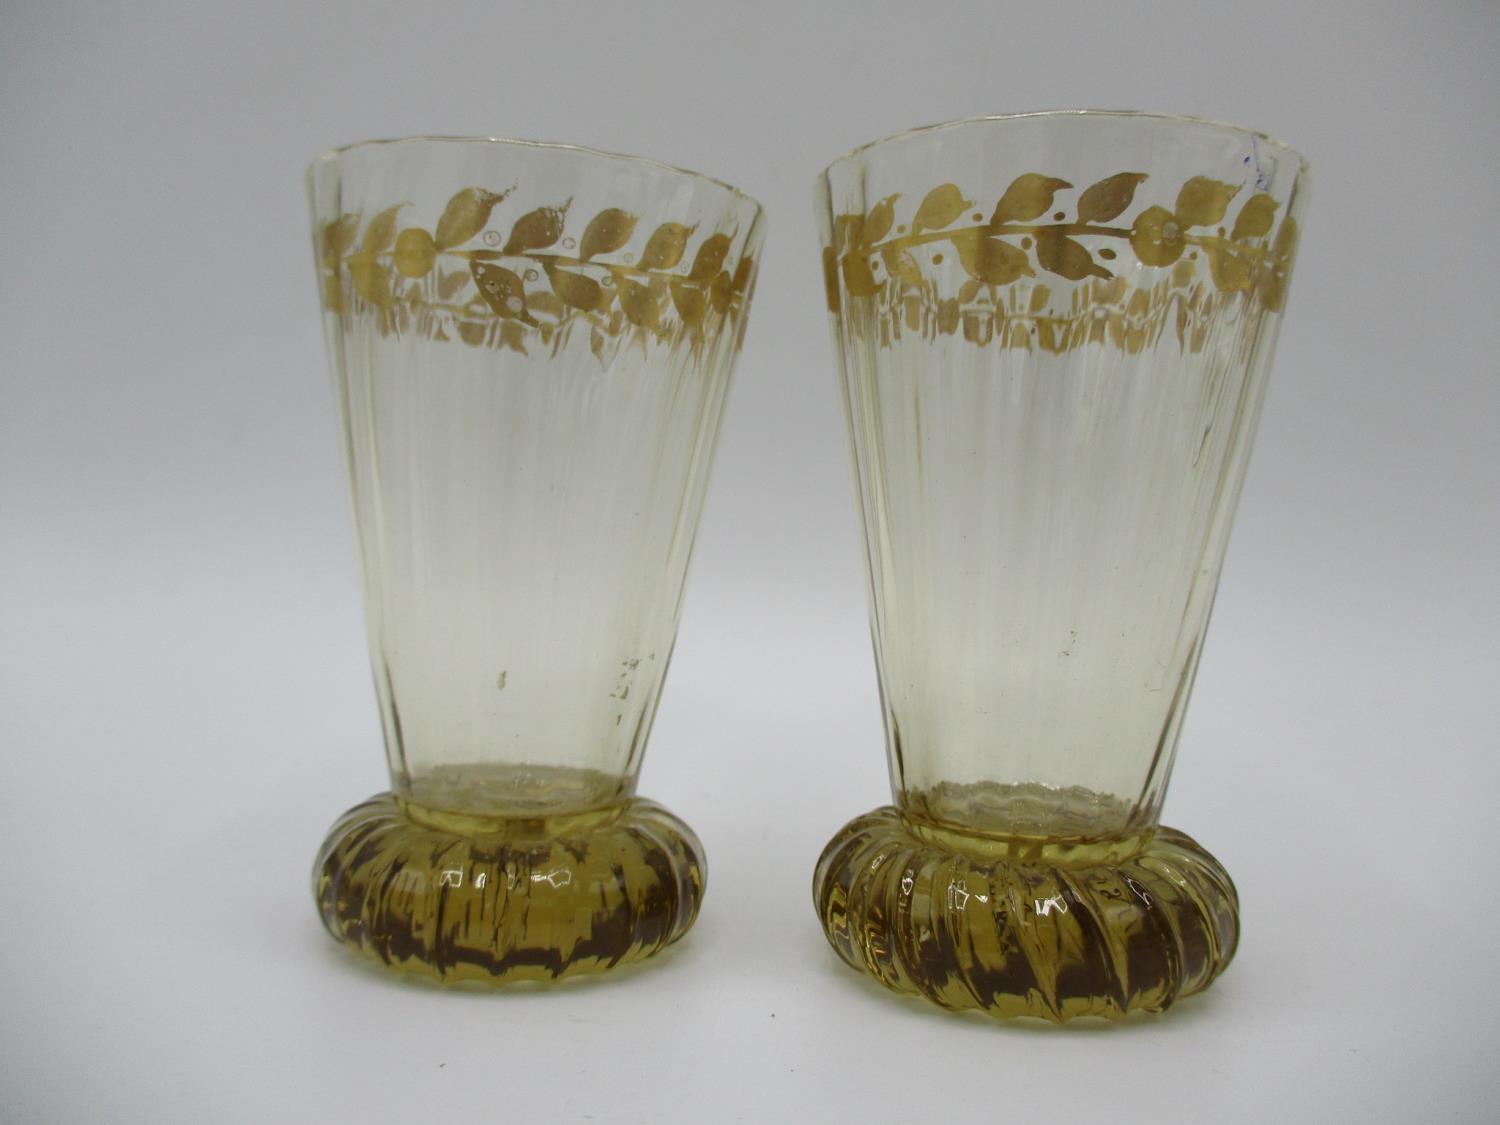 A pair of late 19th century Galle glasses with a tapered, ribbed body decorated with a fruiting